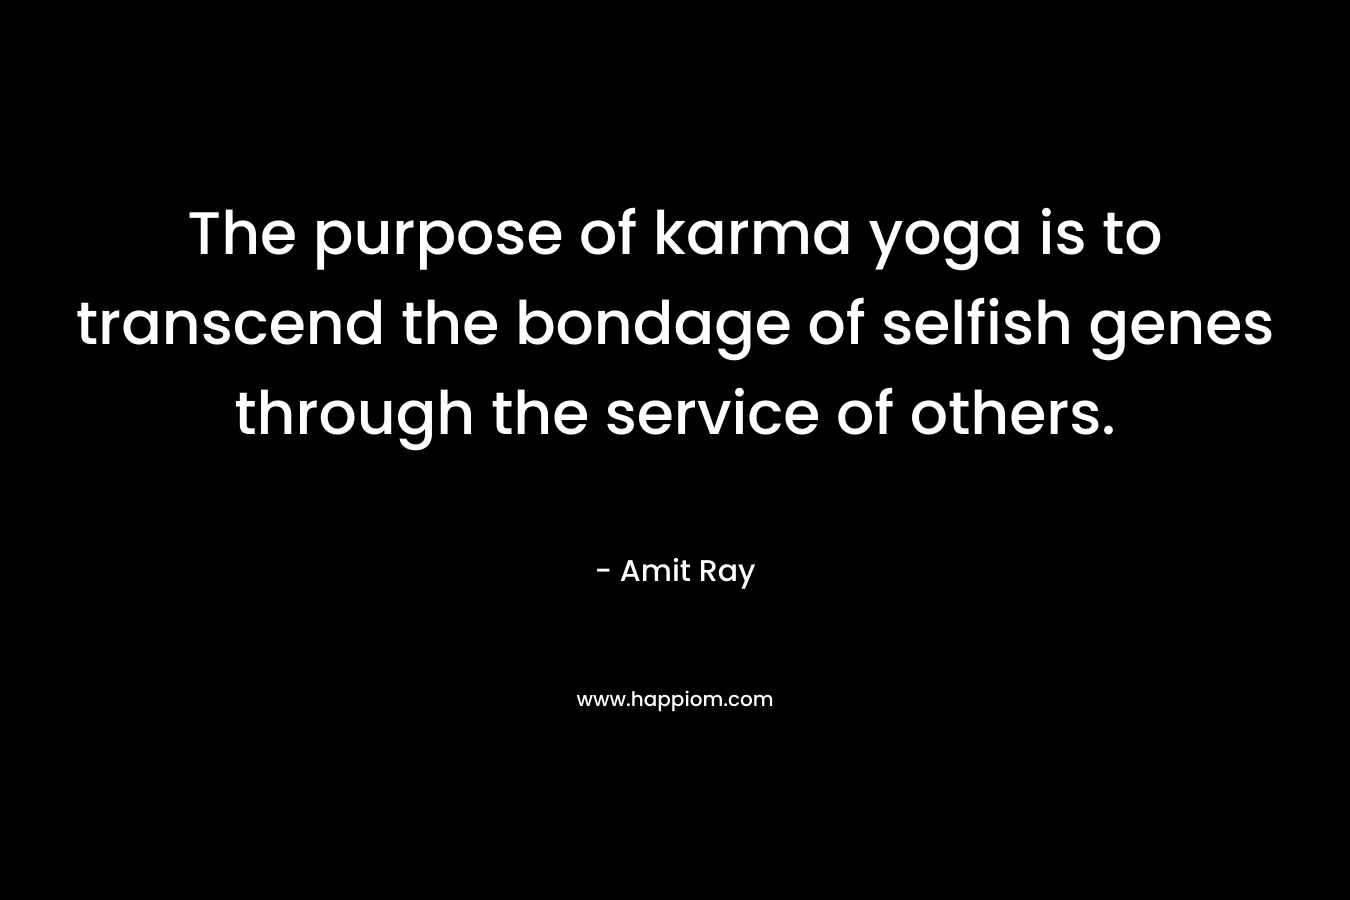 The purpose of karma yoga is to transcend the bondage of selfish genes through the service of others. – Amit Ray